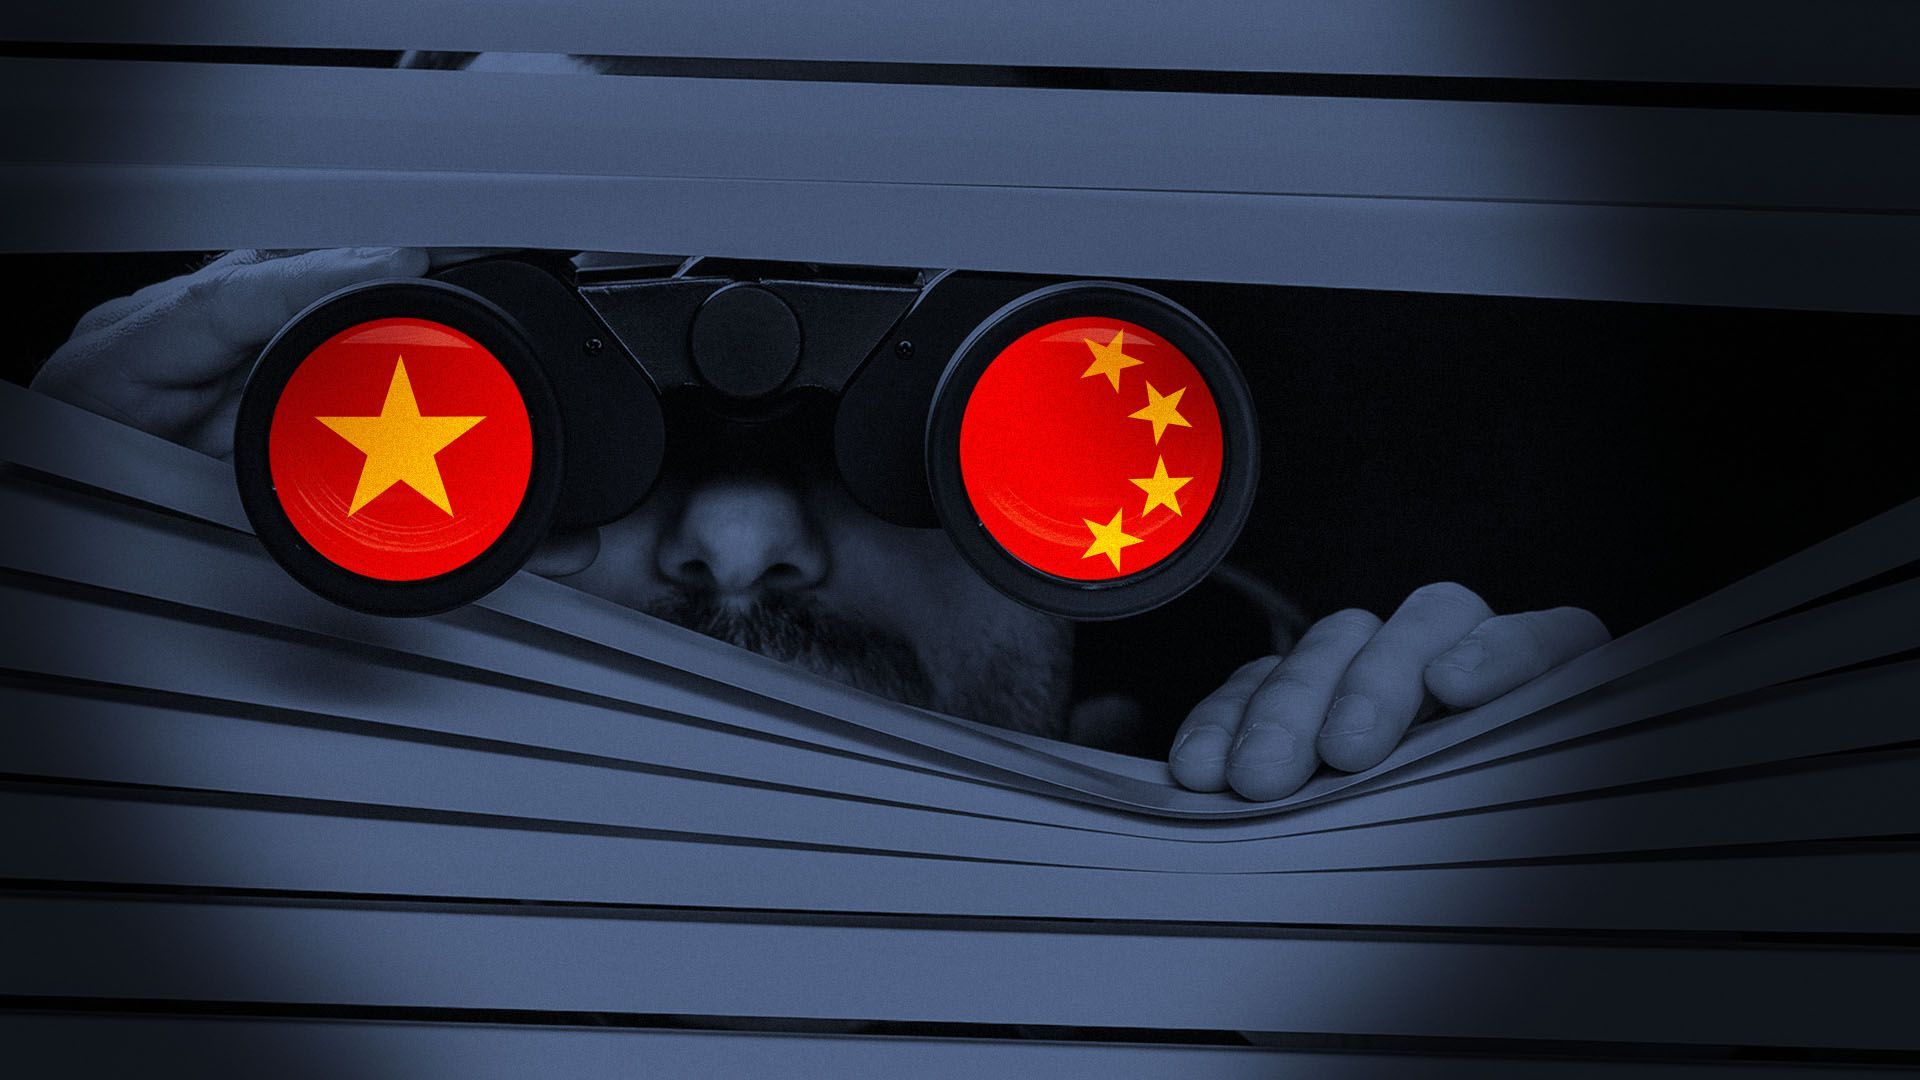 Illustration of an FBI agent looking through blinds on binoculars with the chinese flag overlaid on them